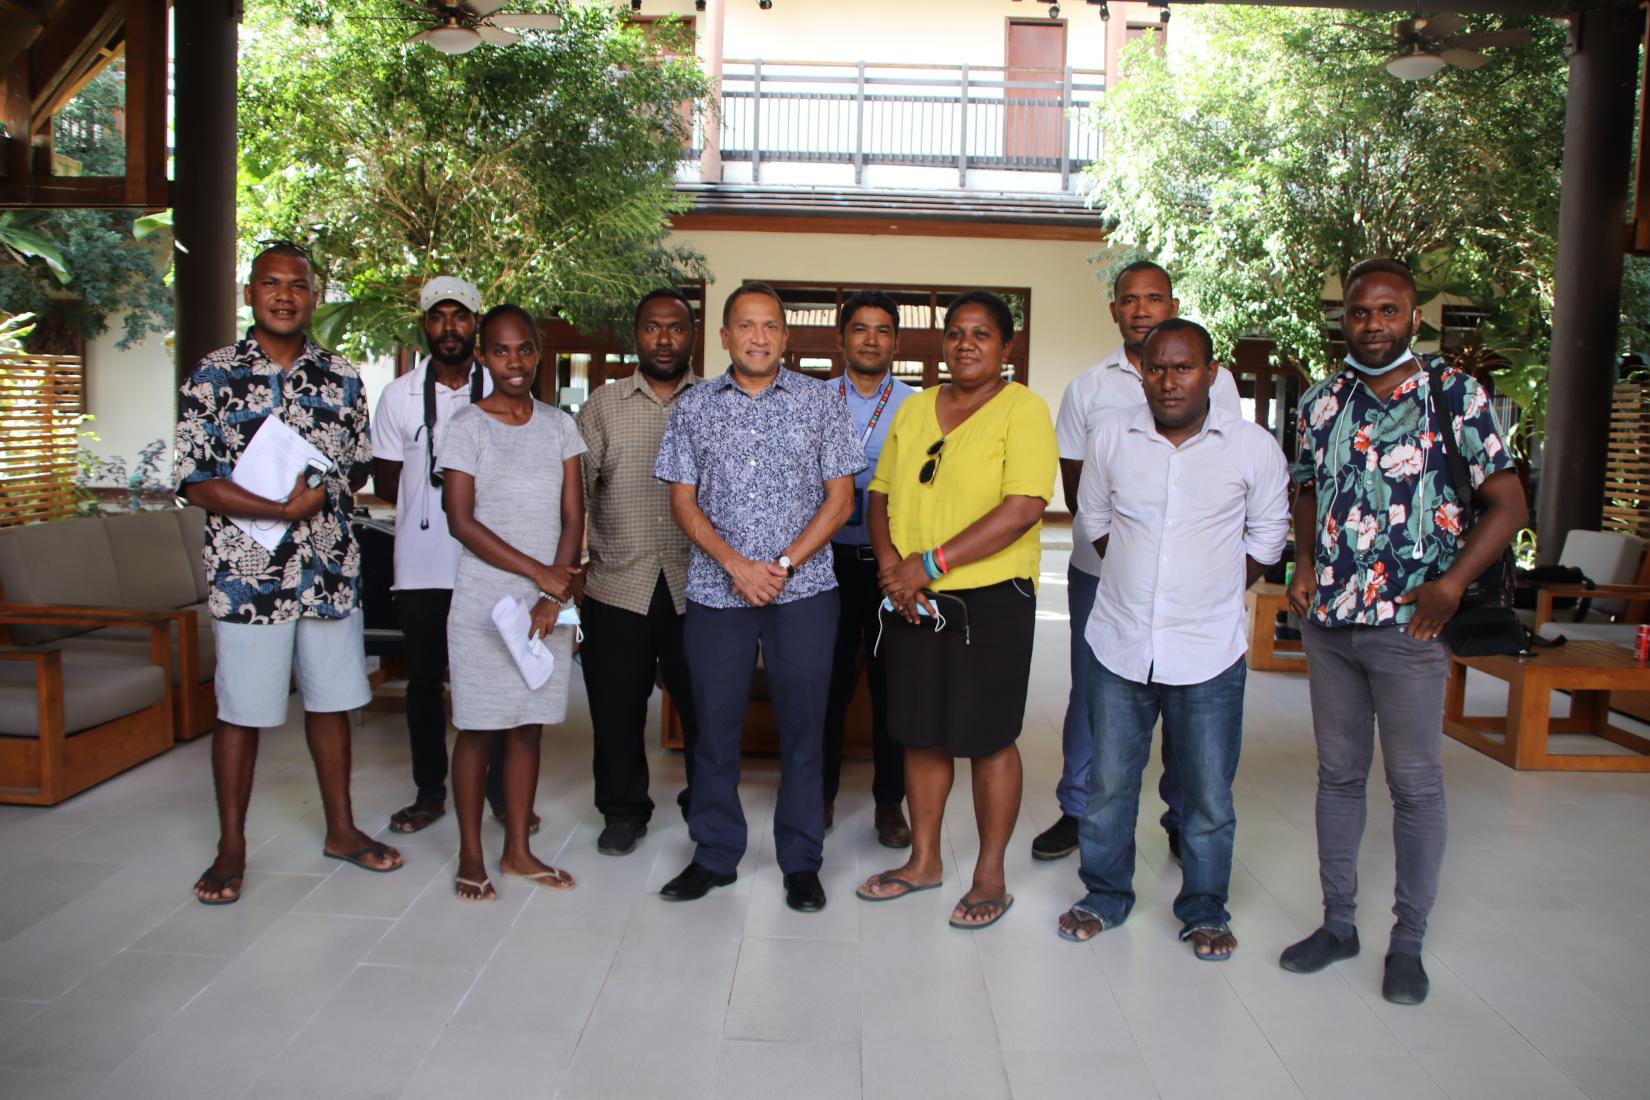 UN Resident Coordinator to Fiji, Solomon Islands, Tonga, Tuvalu and Vanuatu, Sanaka Samarasinha, in the Solomon Islands earlier this year with local journalists after a press conference. On Democracy Day, we join hands for freedom, and to protect the rights of all people, everywhere.